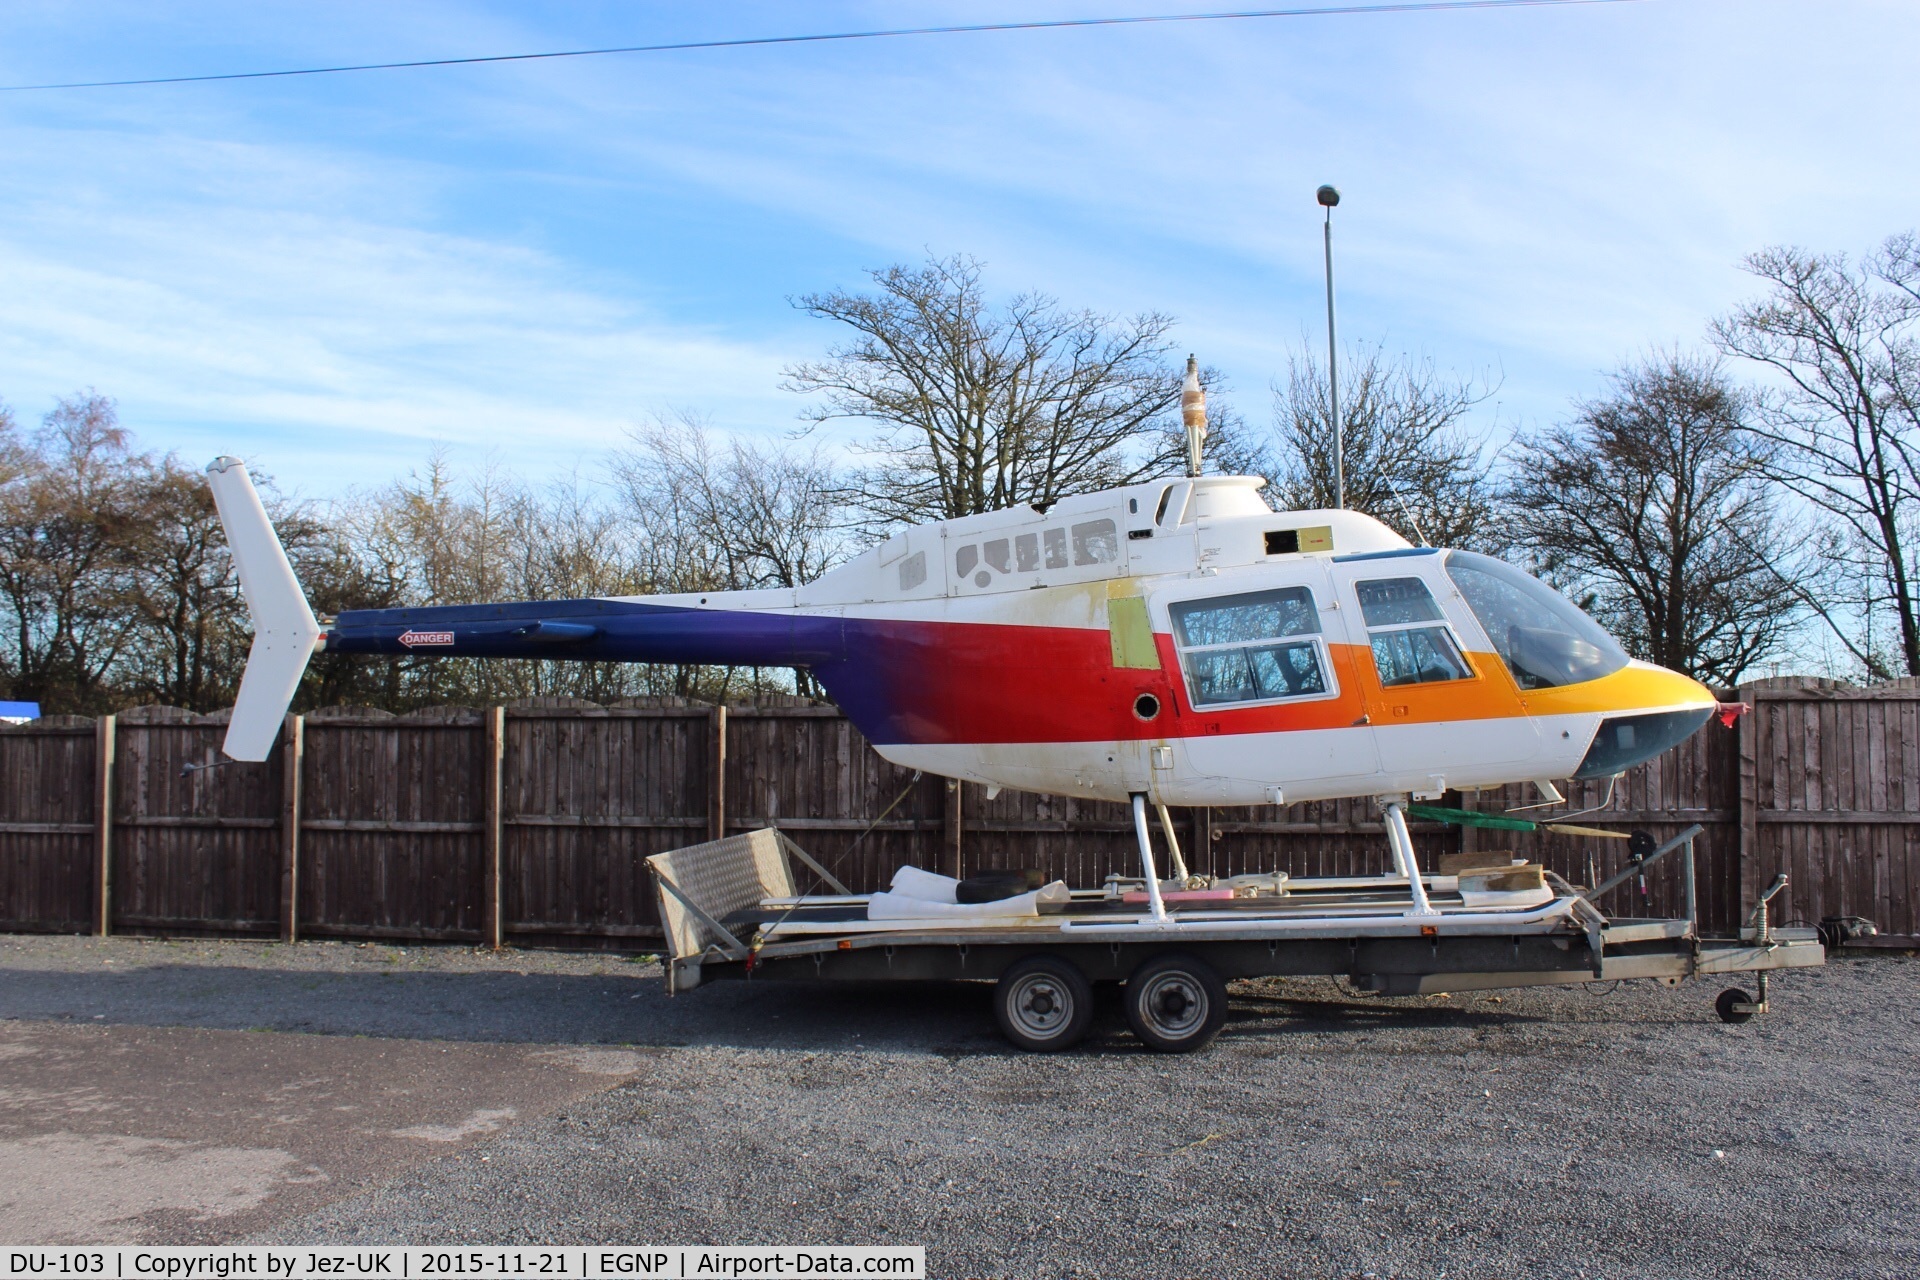 DU-103, 1973 Bell 206B JetRanger II C/N 1193, airframe parked on trailer at Coneypark heliport next to LBA in UK(EGNM) with rotors and parts missing, no identification and not totally confirmed to be c/n 1193,